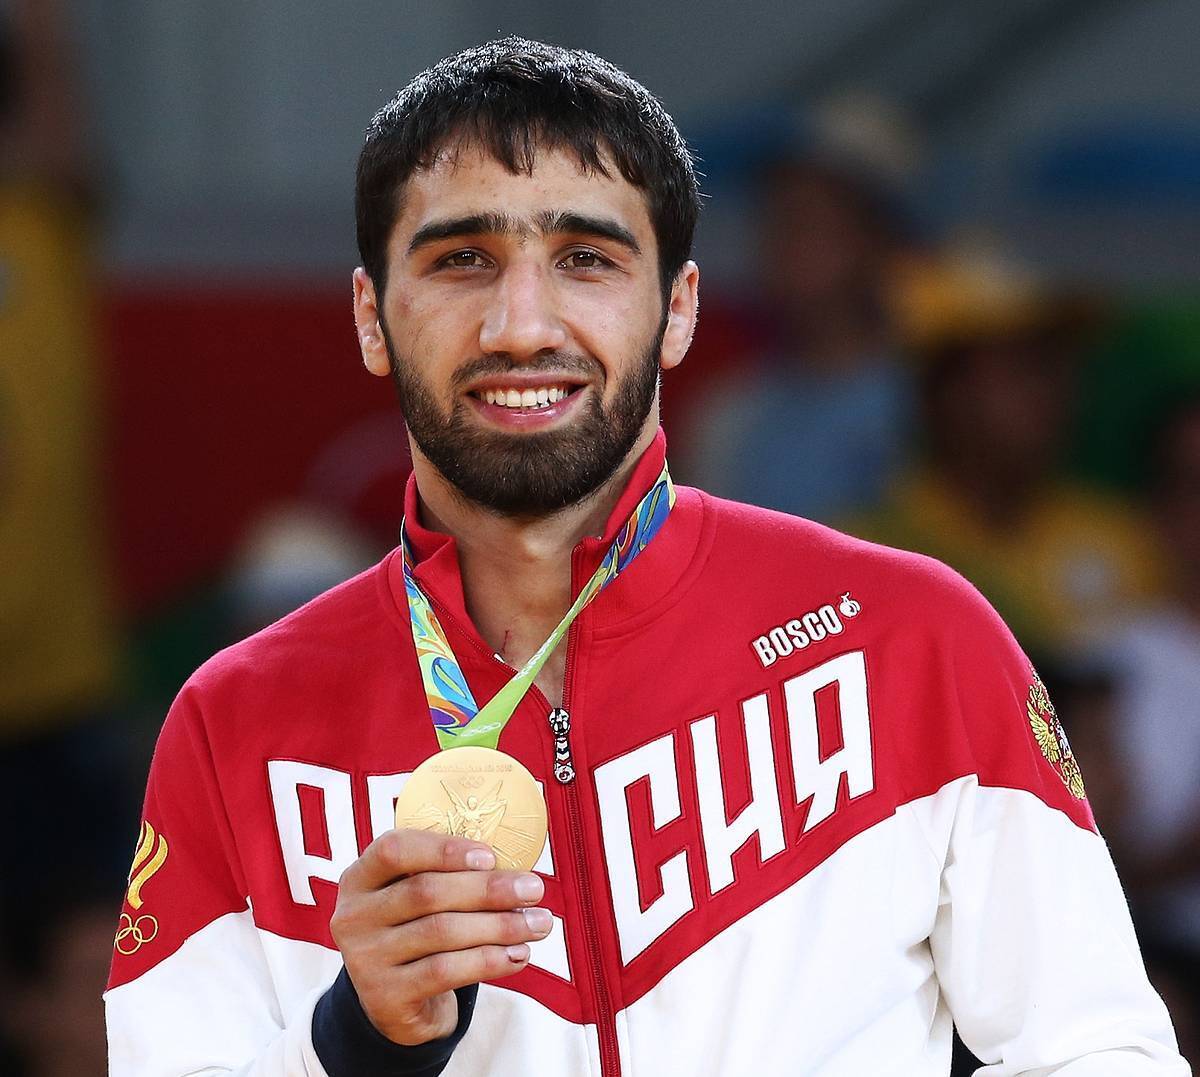 Russian Olympic champion disqualified because of Palestinian flag